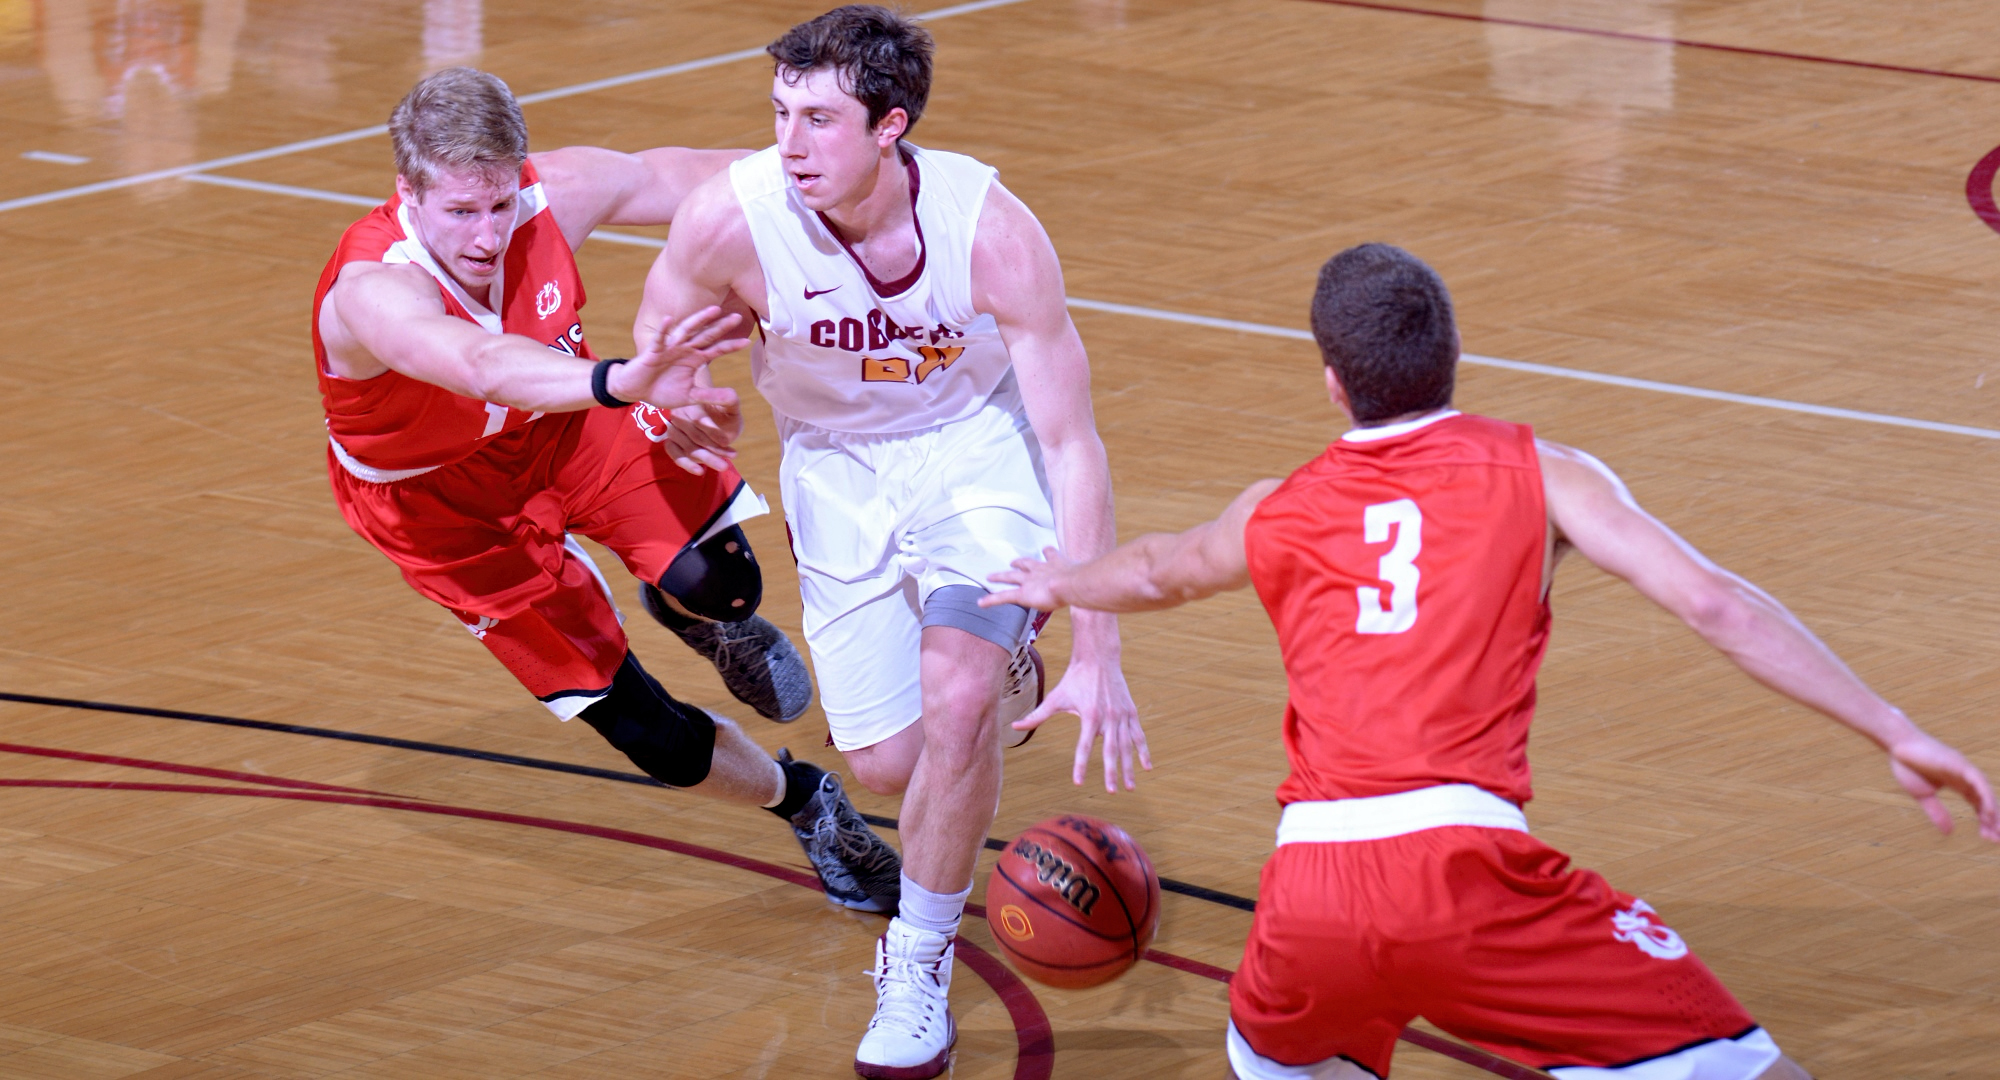 Cobber senior Austin Nelson dribbles by former high school teammate Aaron Lien on his way to the basket in Concordia's game with MSU Moorhead.